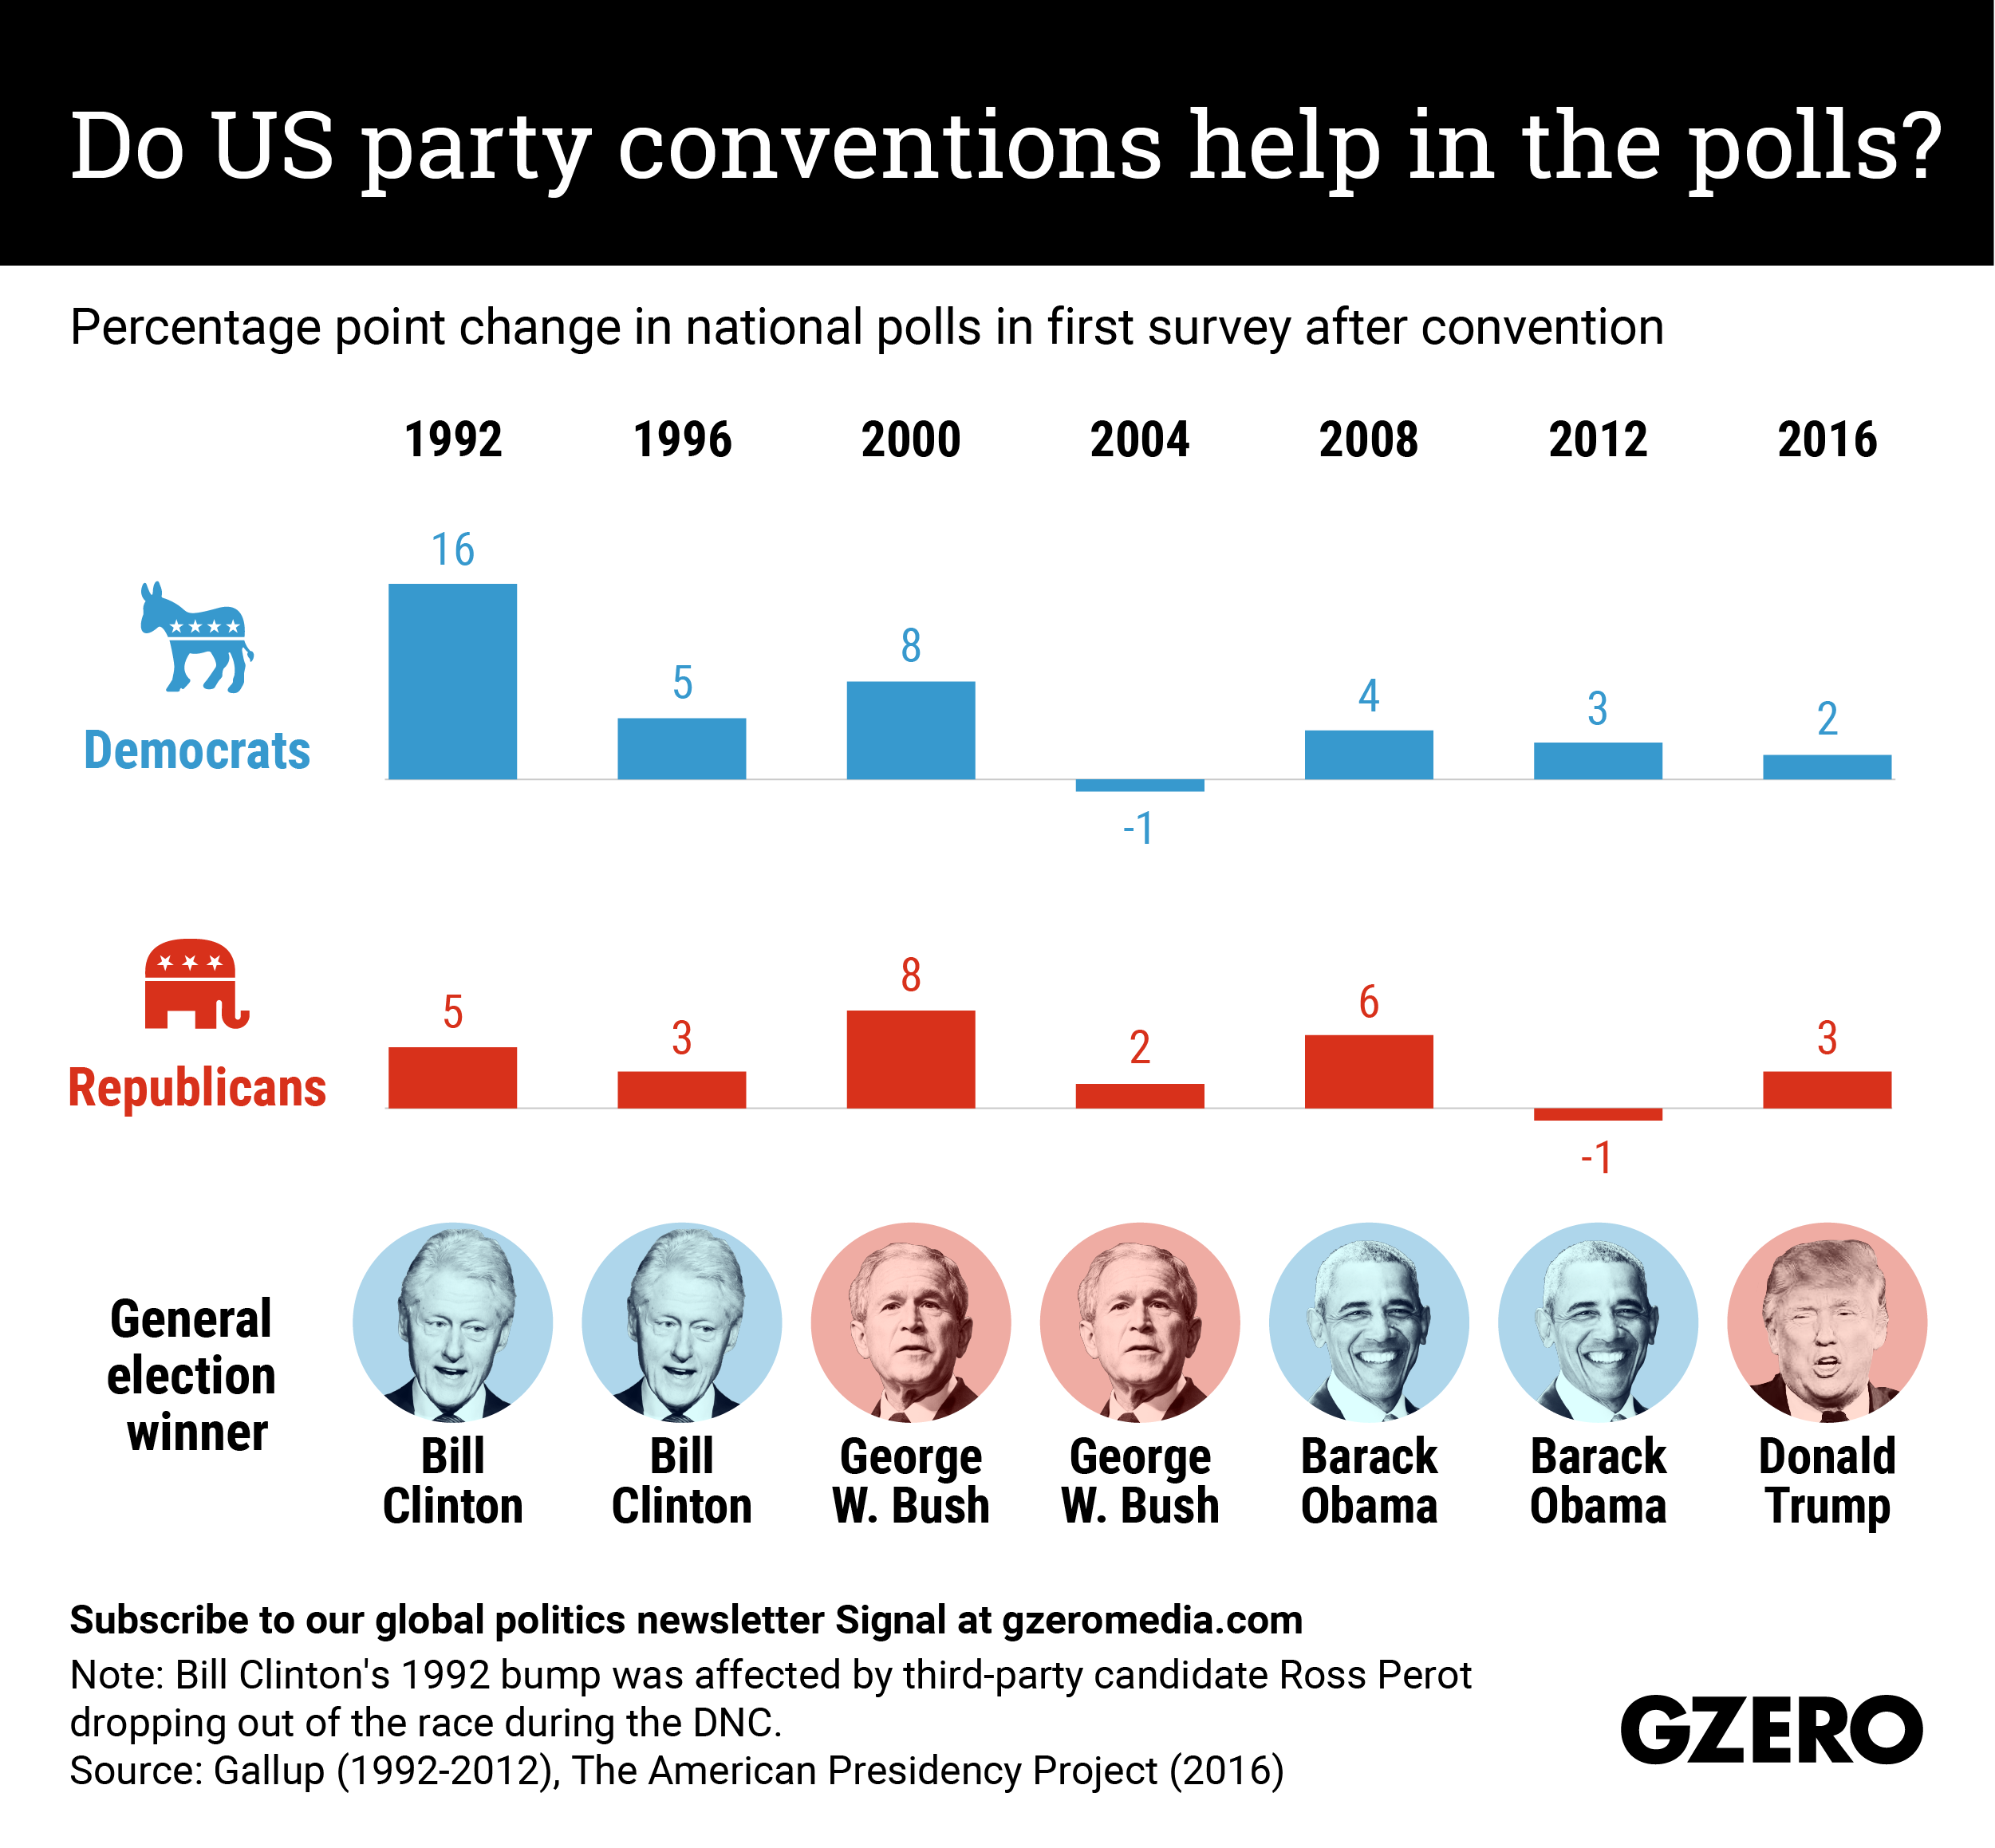 The Graphic Truth: Do US party conventions help in the polls?